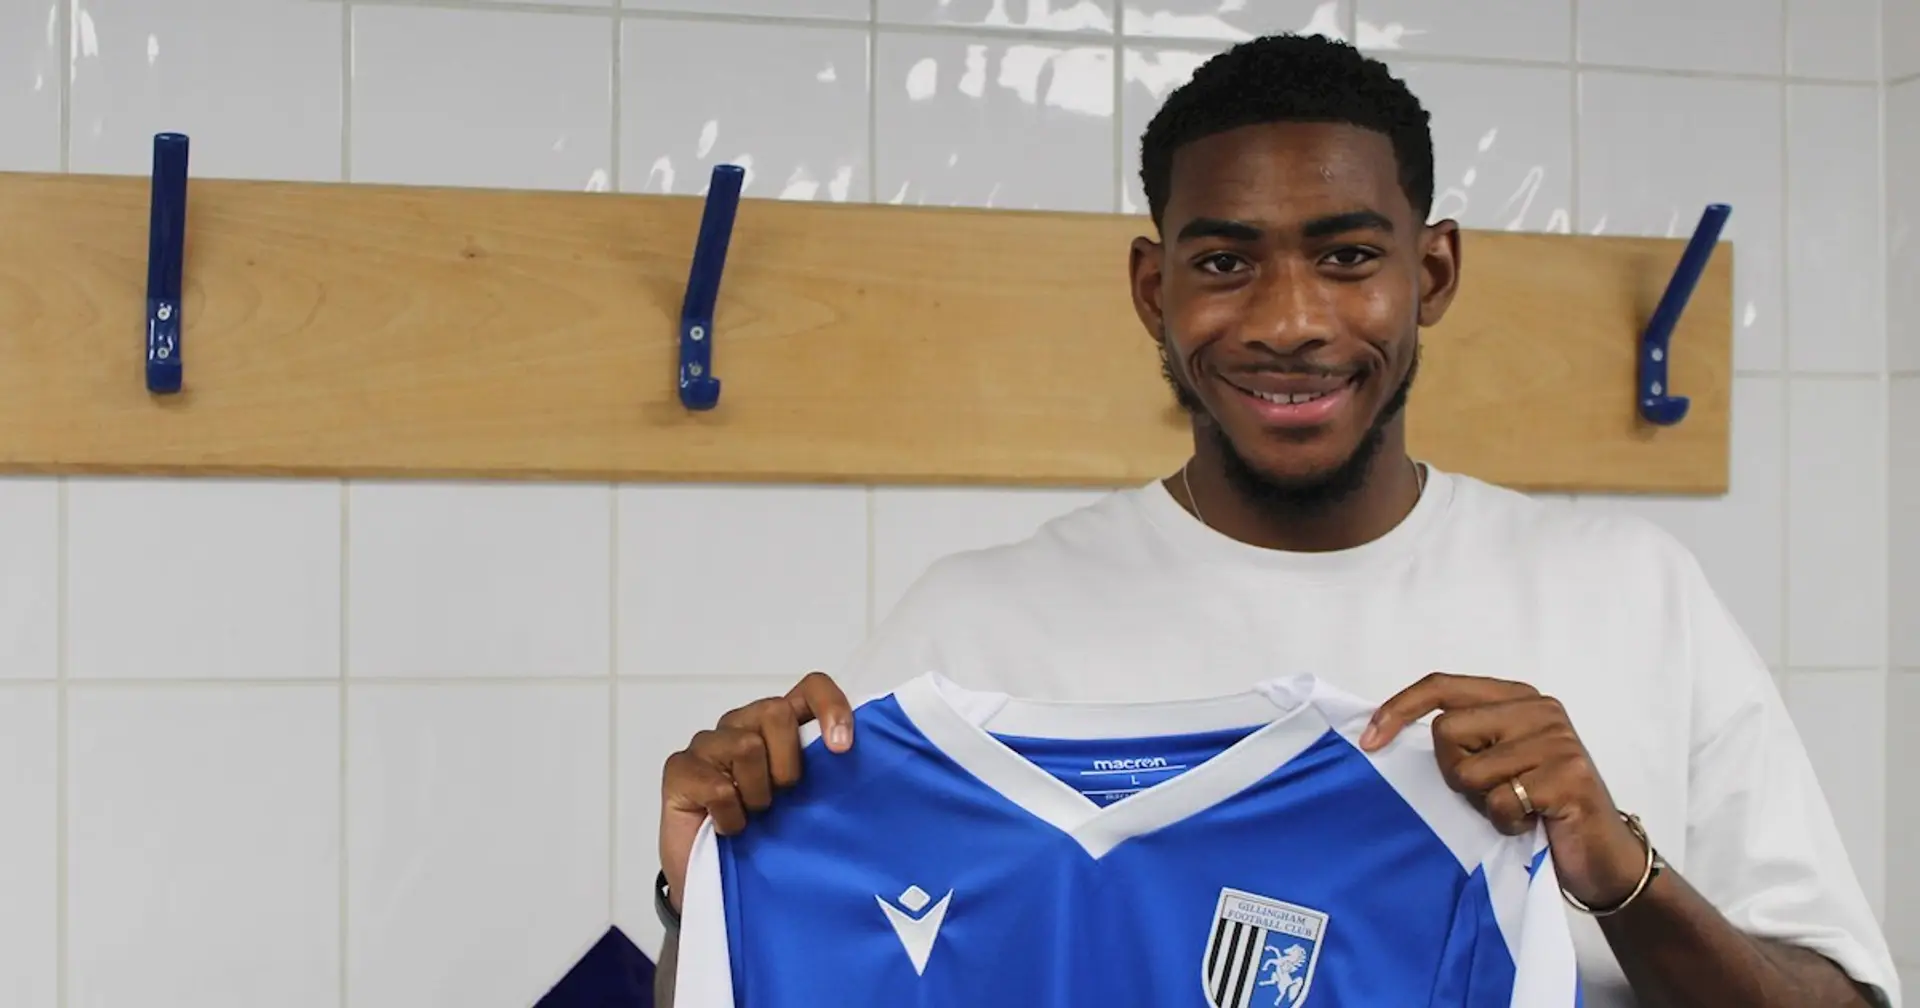 OFFICIAL: Arsenal youngster Zech Medley joins League One side Gillingham on loan for next season